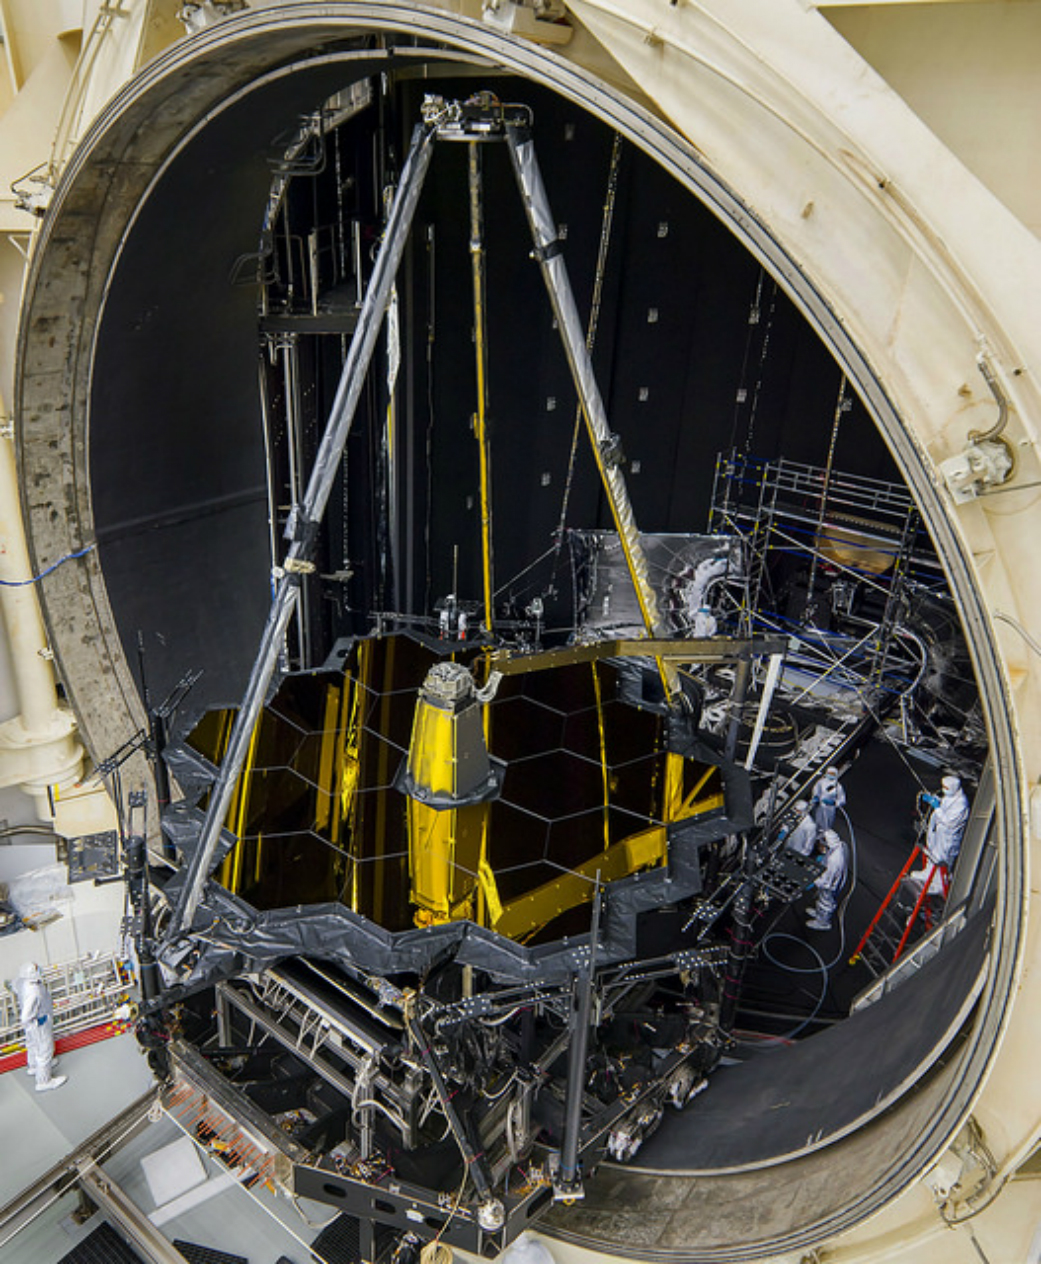 Webb Telescope optical system inside Johnson Space Center’s thermal vacuum Chamber A